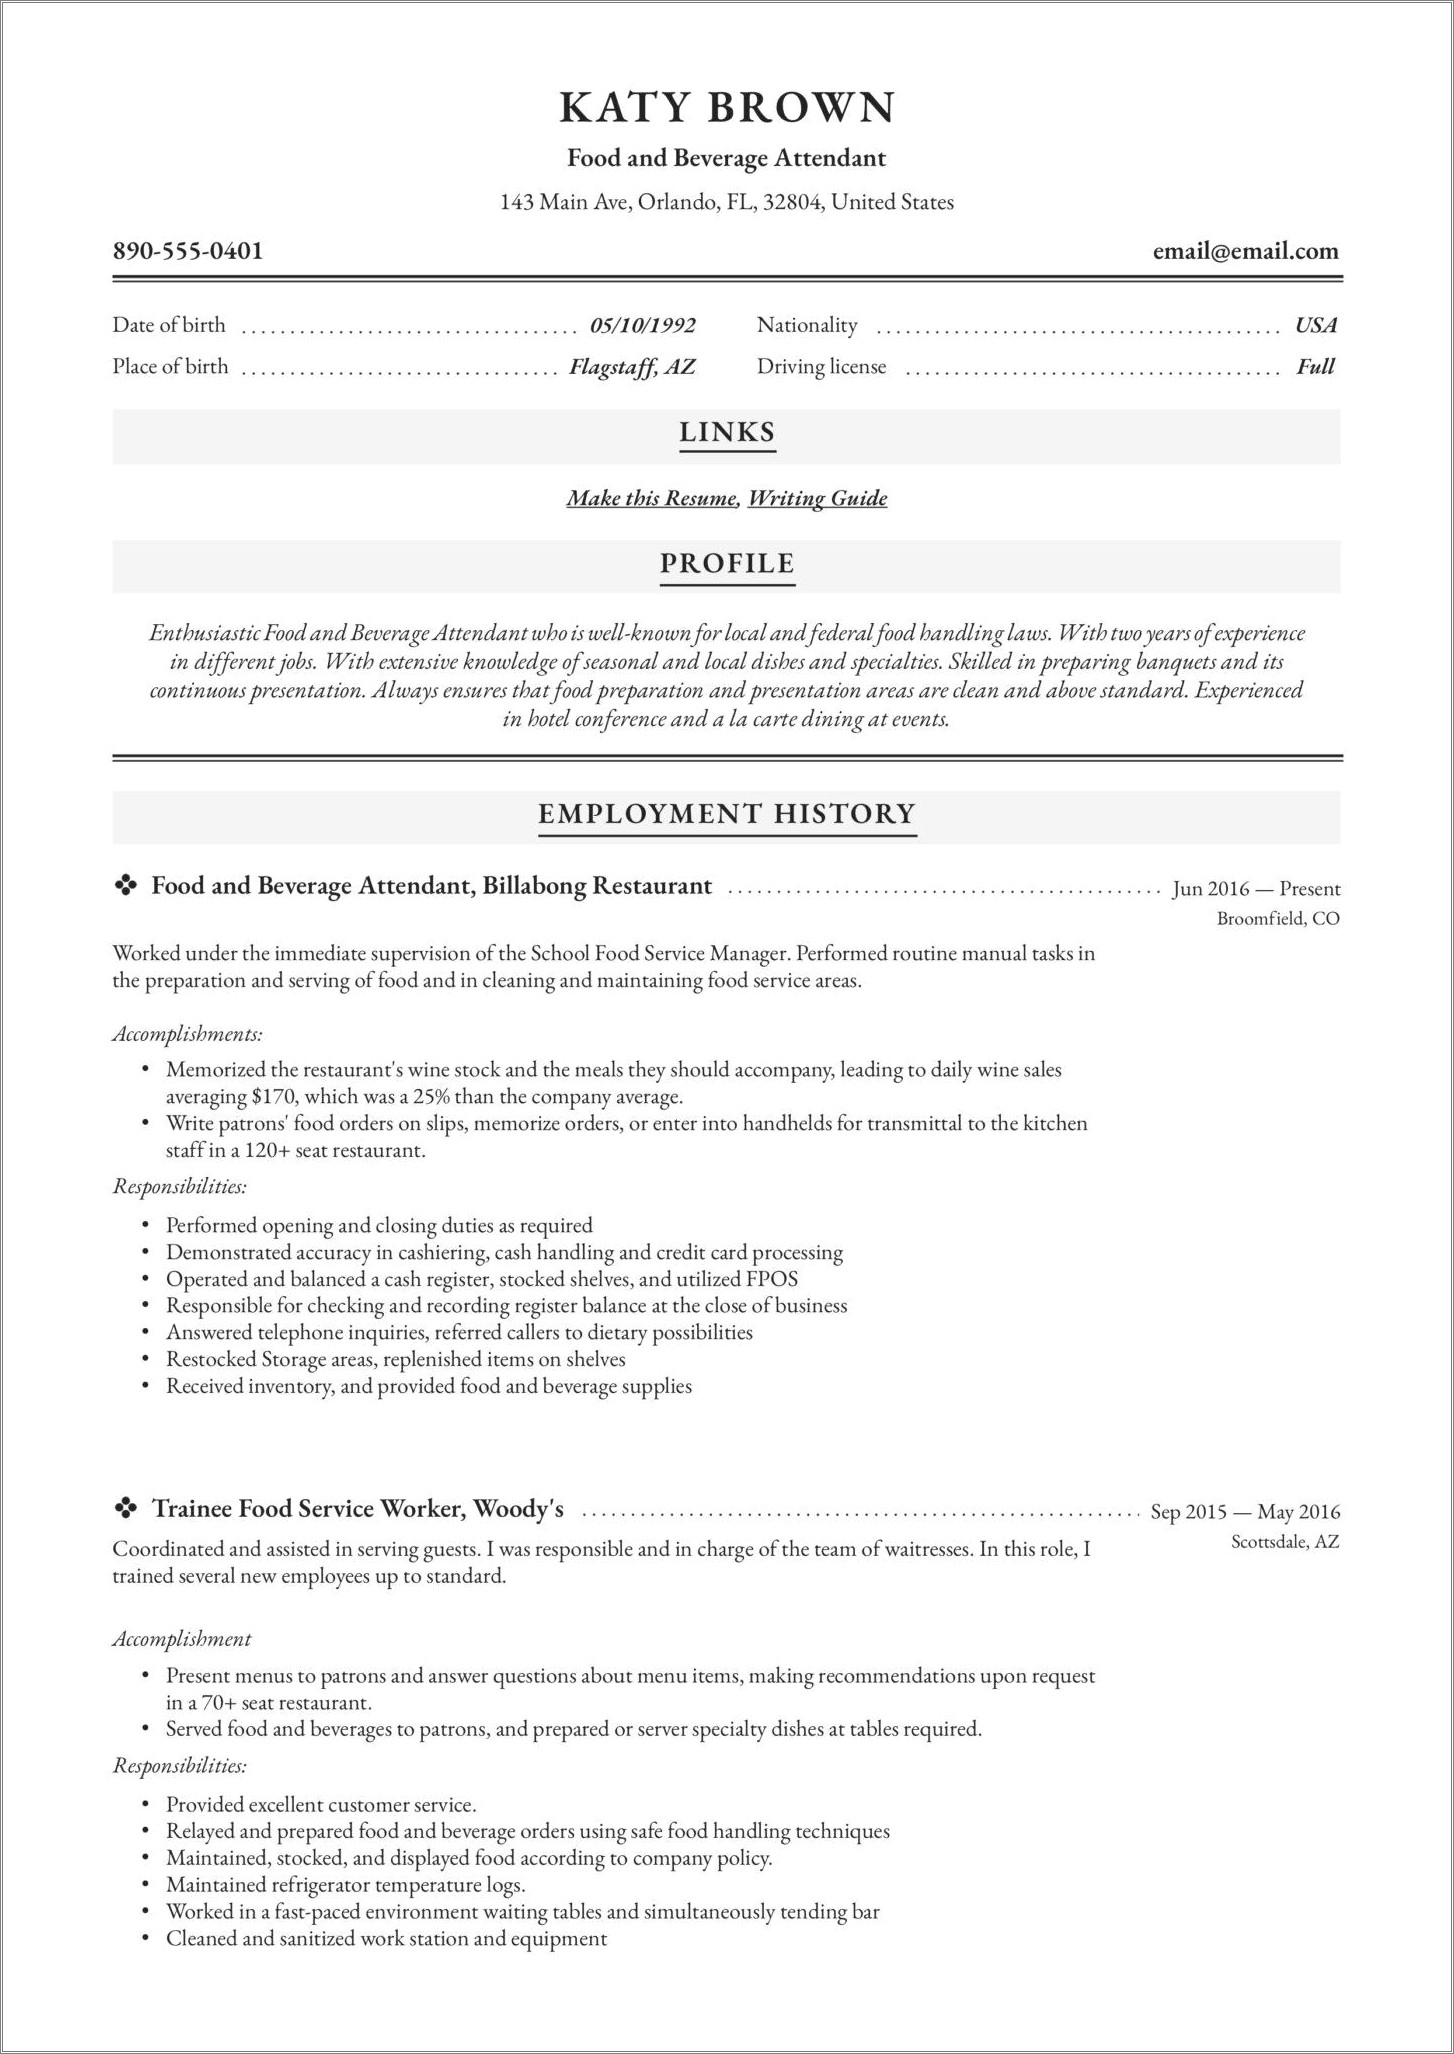 Explaining Restaurant Experience In A Resume